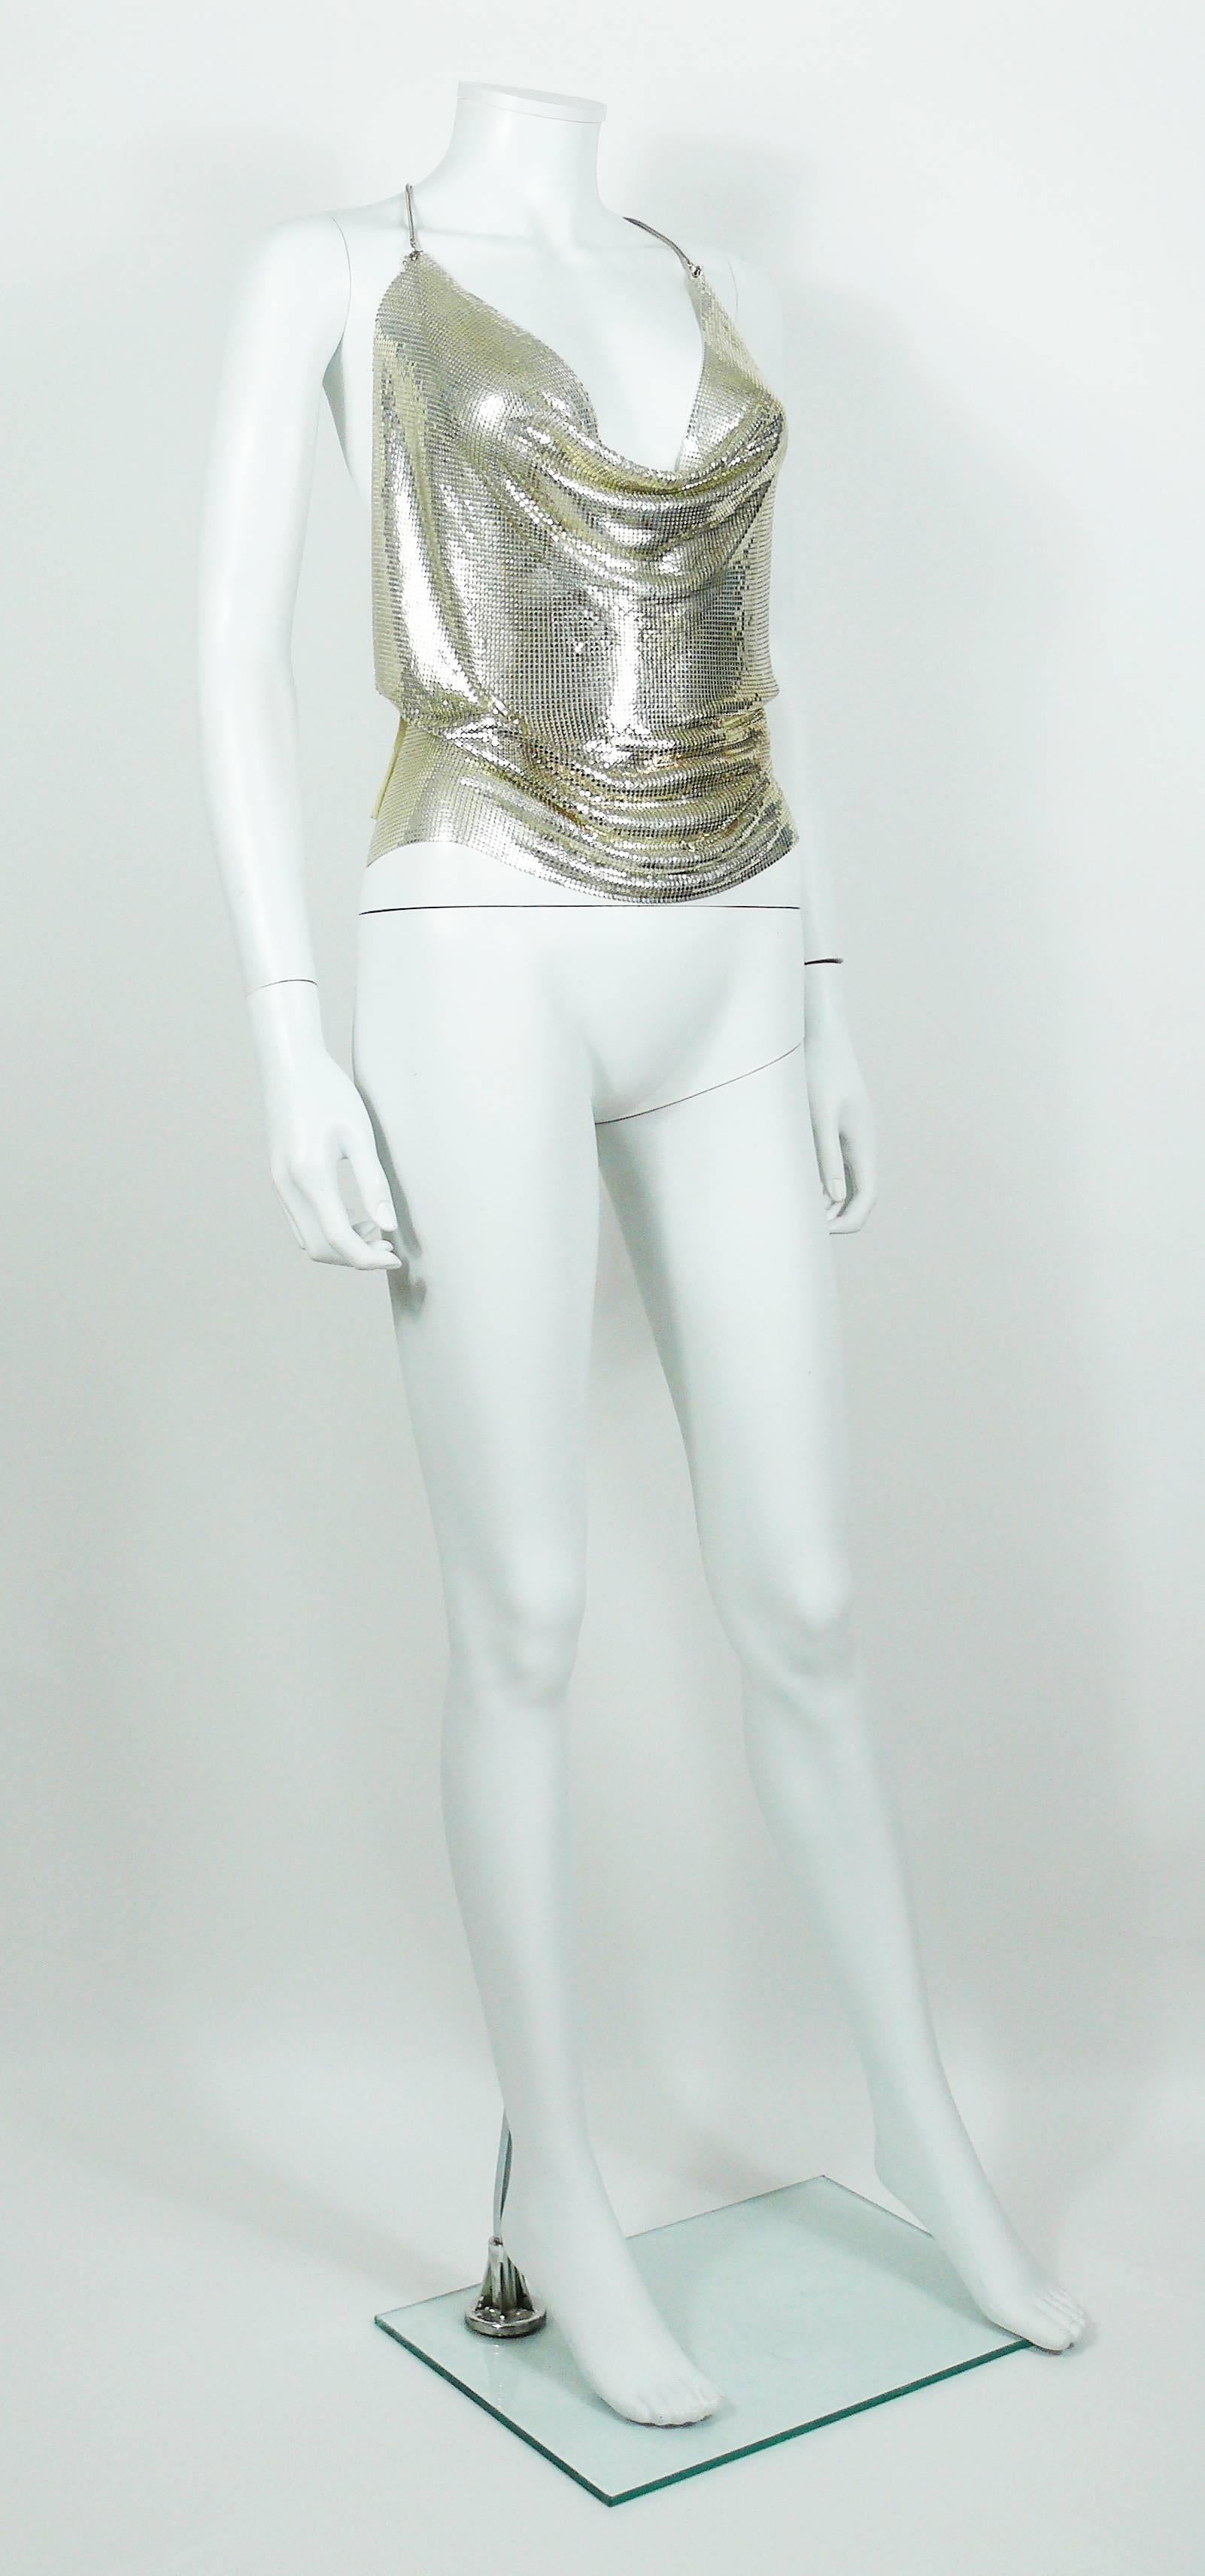 PACO RABANNE vintage polished silver tone metal mesh backless with draped front top.

Probably never worn (original tag attached).

Metal tag PACO RABANNE Paris.
Made in France.

Size tag reads : S.

CLOTHES CONDITION CHART
- New or never worn :